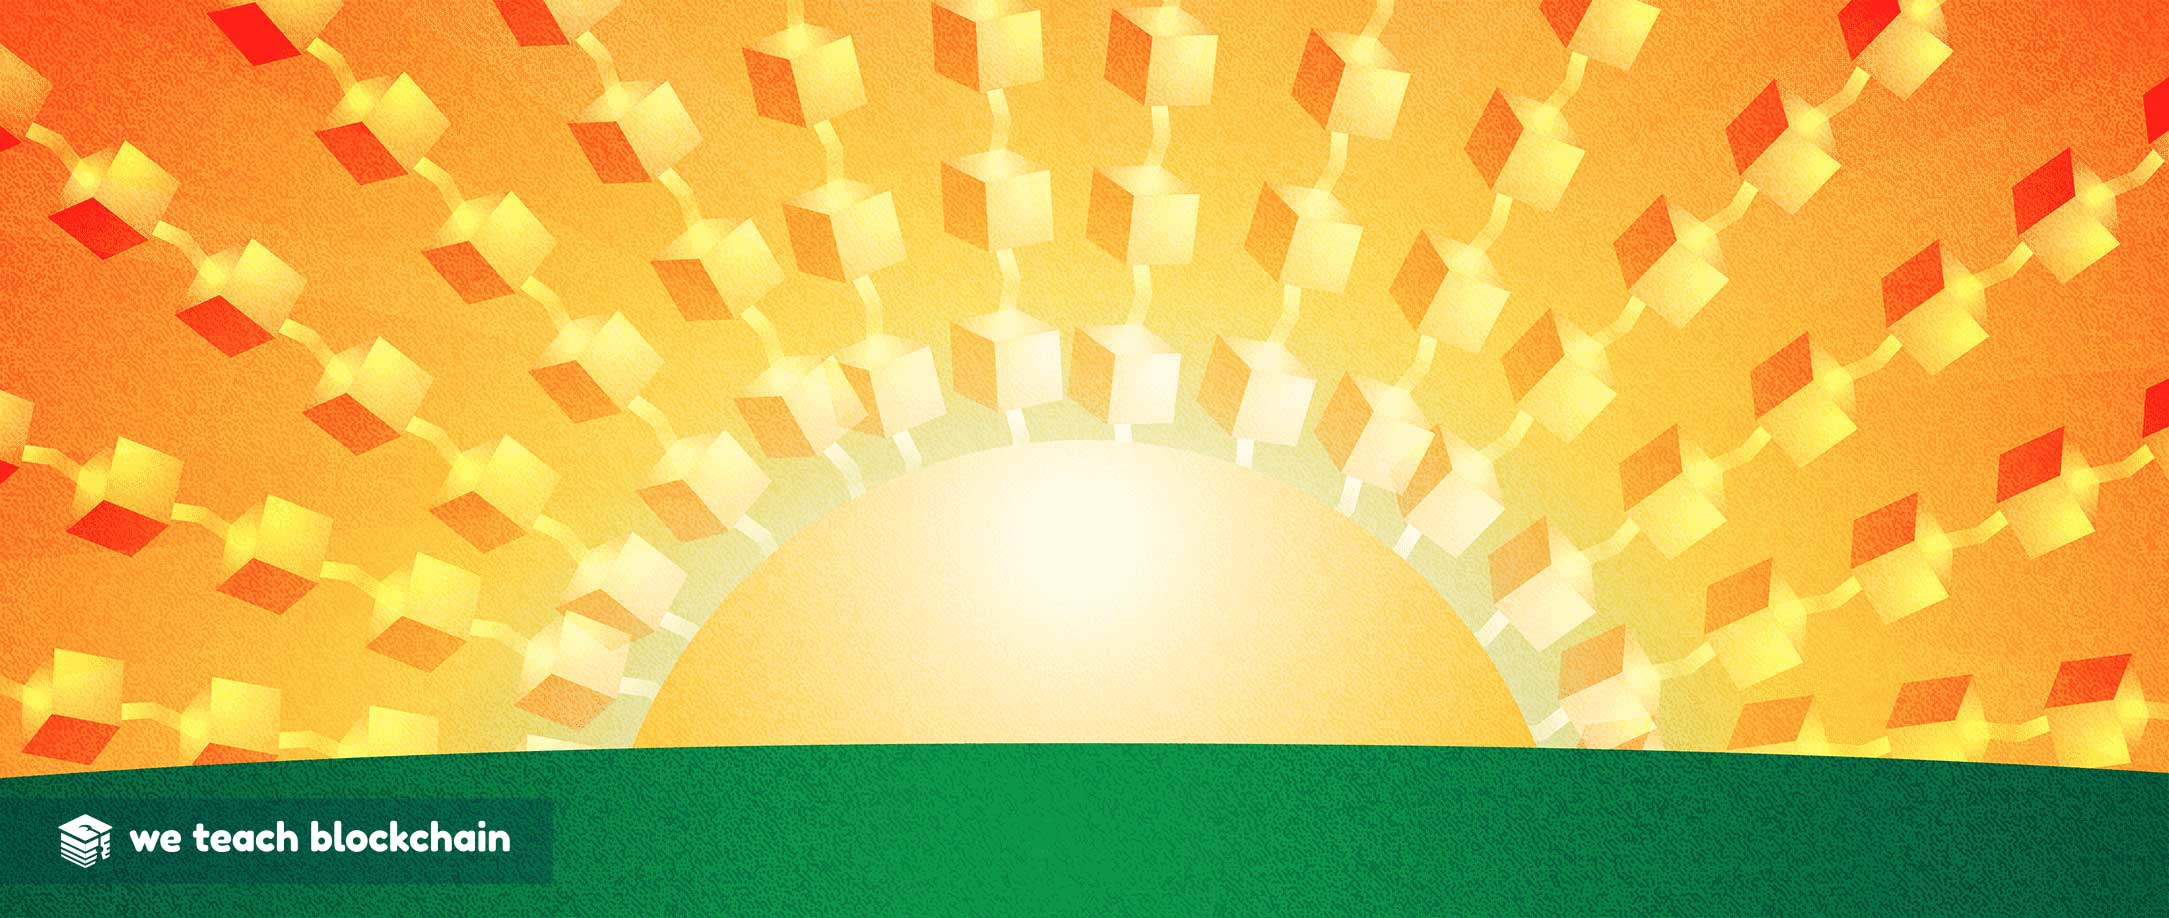 Sunrise with rays of blocks representing scaling